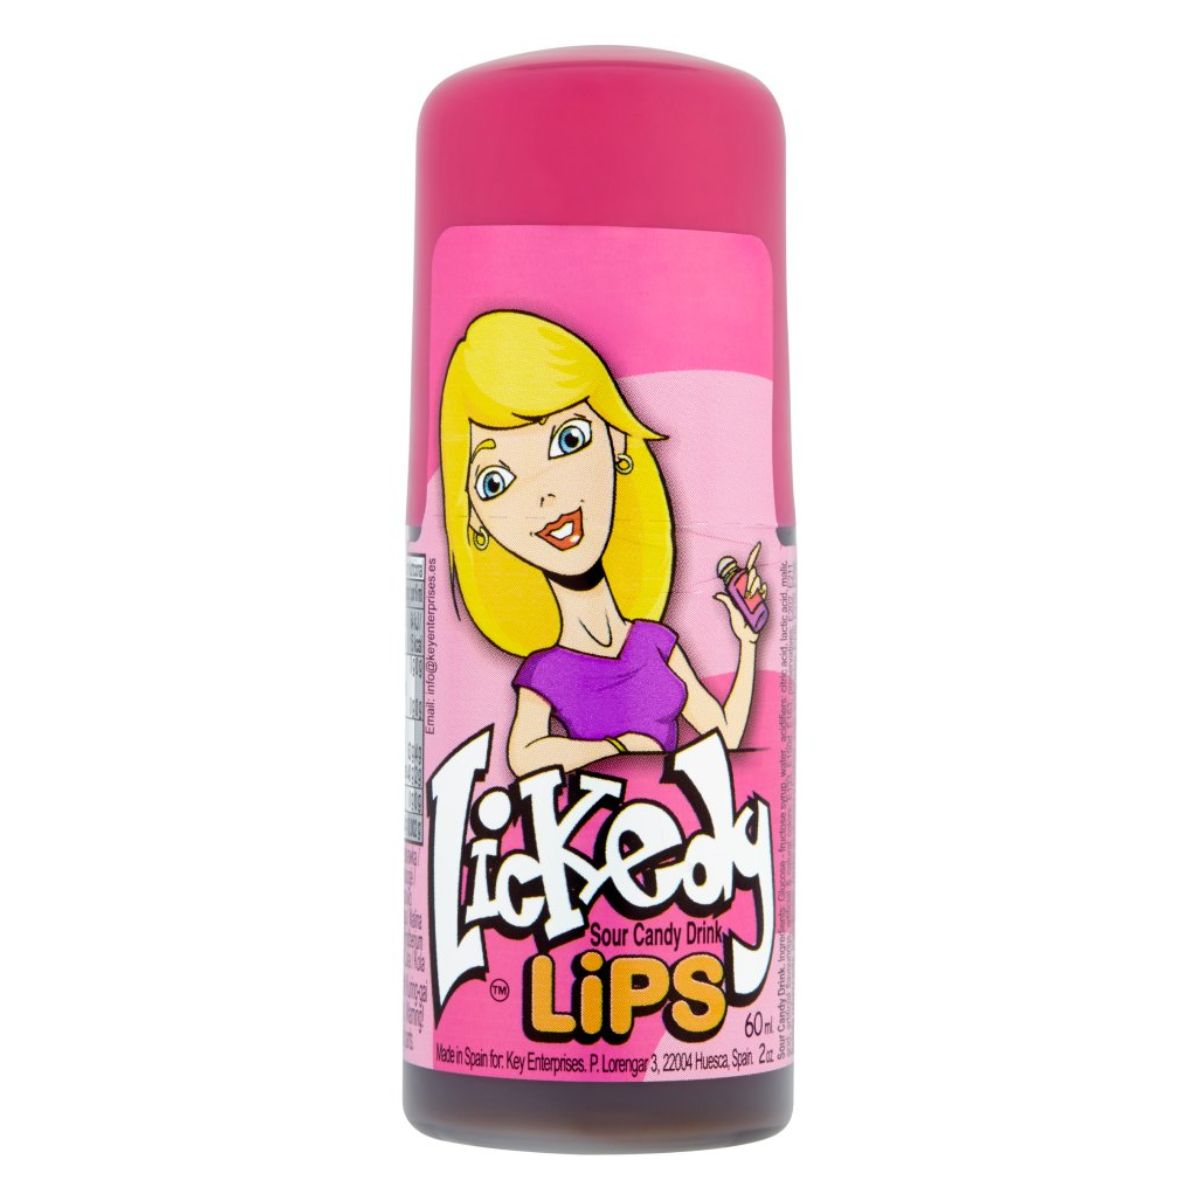 A bottle of Lickedy Lips Sour Candy Drink - 60ml with a cartoon illustration of a blonde female character on the label.